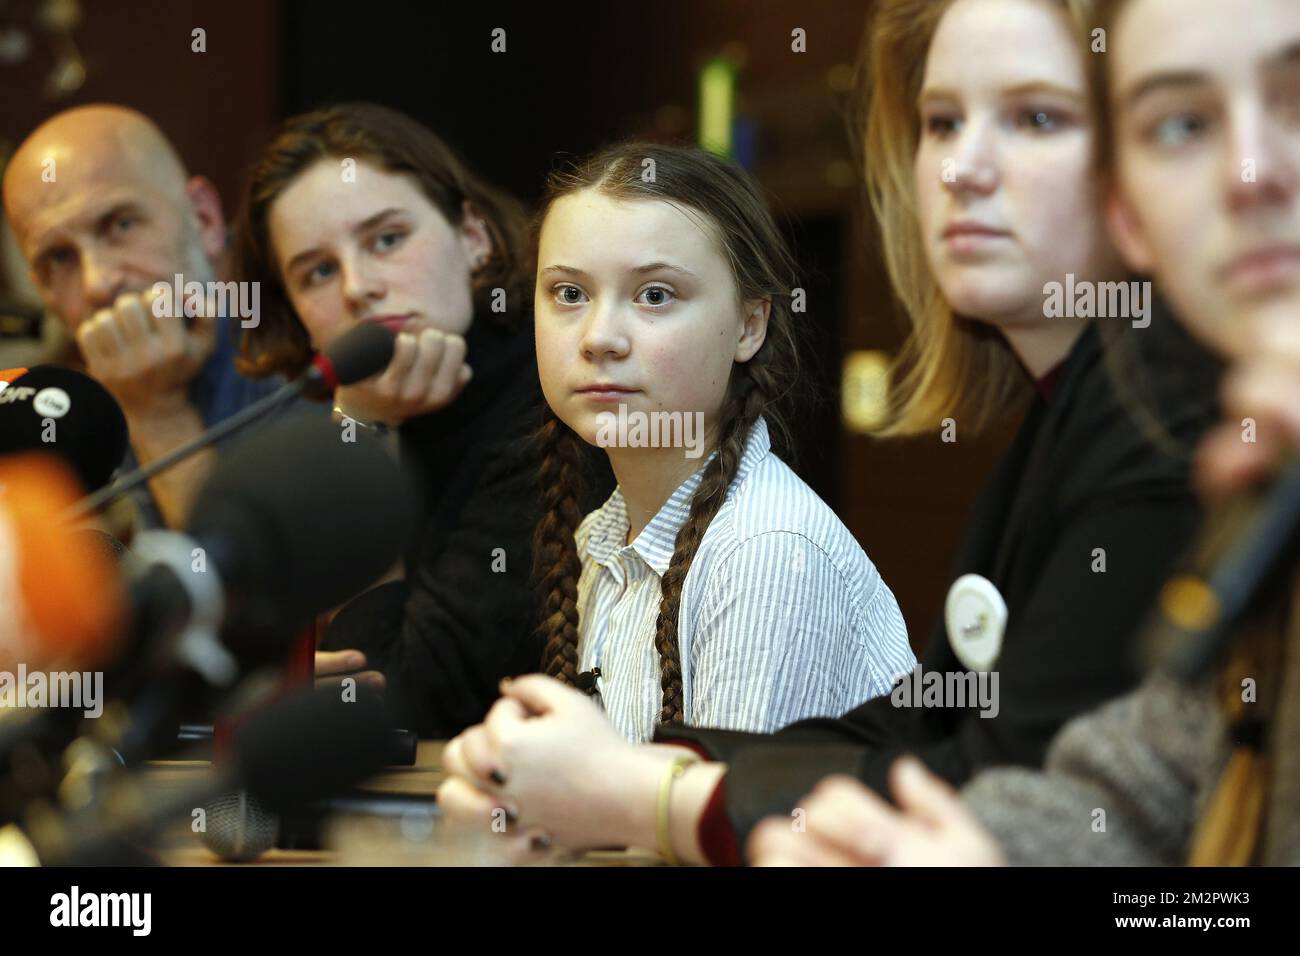 Nic Balthazar, Climate activist Anuna De Wever, Swedish climate activist Greta Thunberg and Climate activist Kyra Gantois pictured during a press conference following a student strike action, organized by 'Youth For Climate', urging pupils to skip classes to protest a lack of climate awareness, Thursday 21 February 2019 in Brussels. This marks the seventh consecutive week youths take the streets on Thursday. The action is inspired by the 'School Strike' of Swedish 15-year-old Greta, joining the protests in Brussels today. BELGA PHOTO NICOLAS MAETERLINCK  Stock Photo